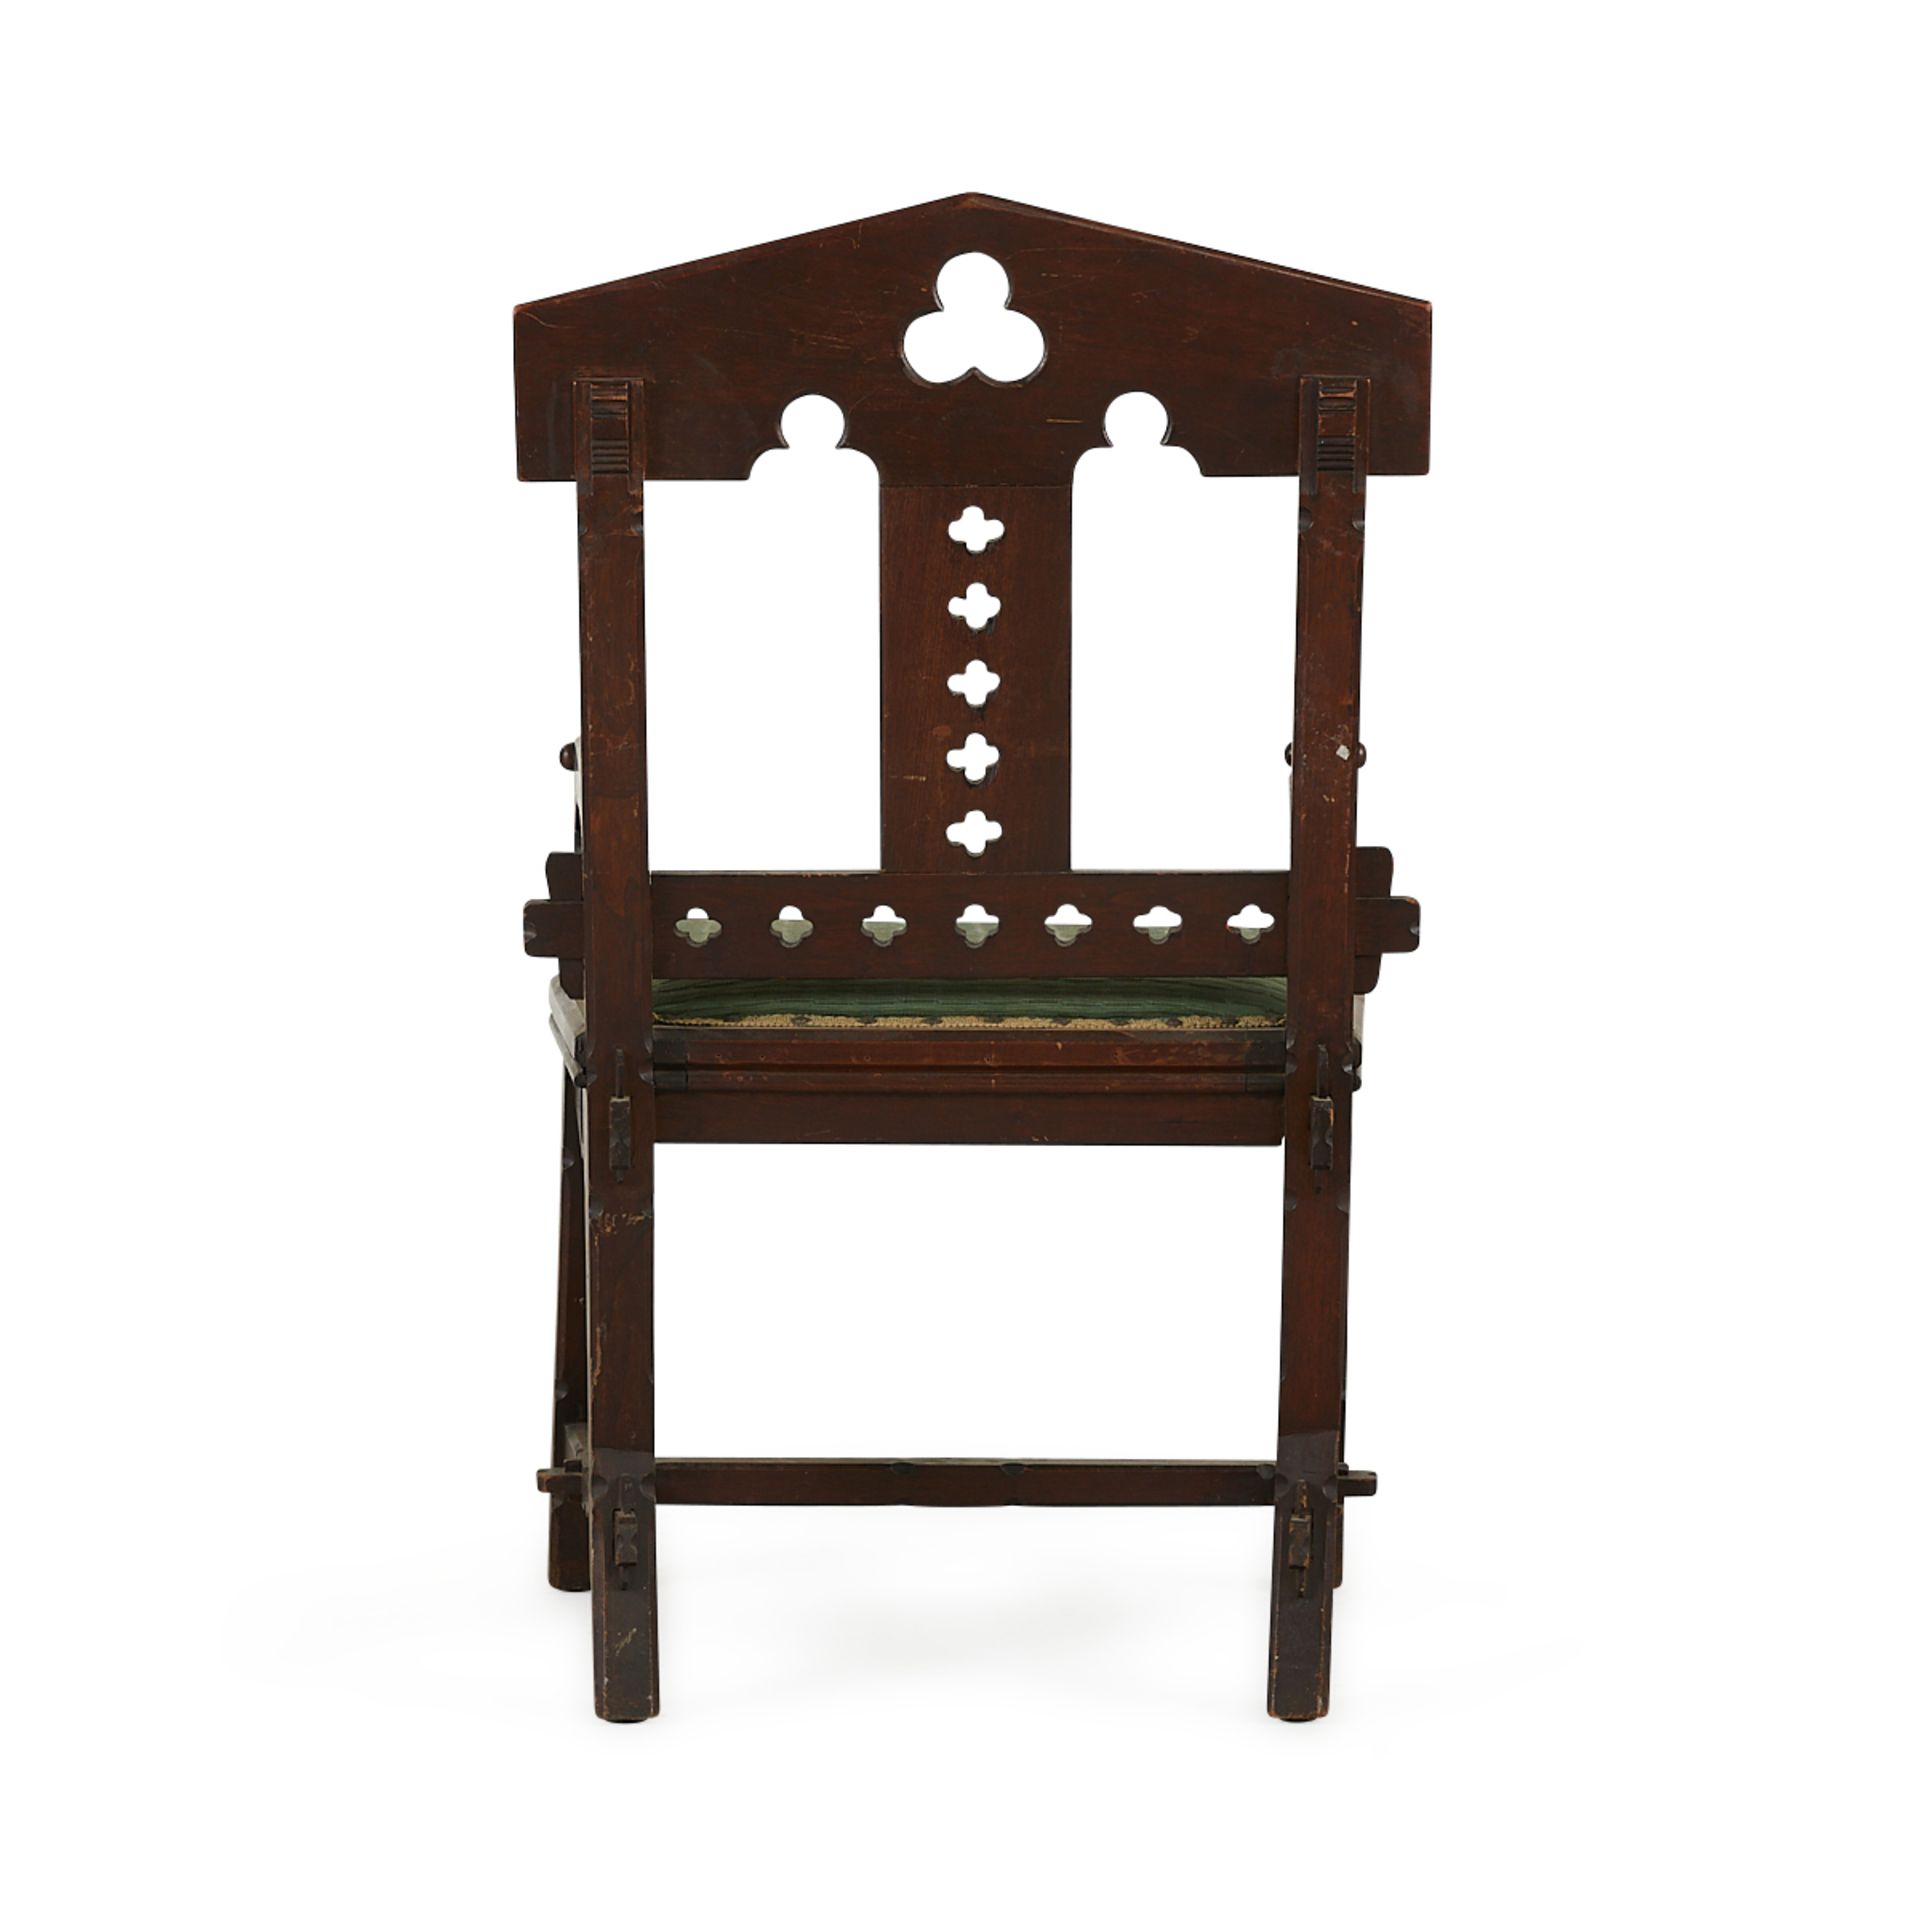 Aesthetic Movement Gothic Walnut Chair ca. 1875 - Image 5 of 11